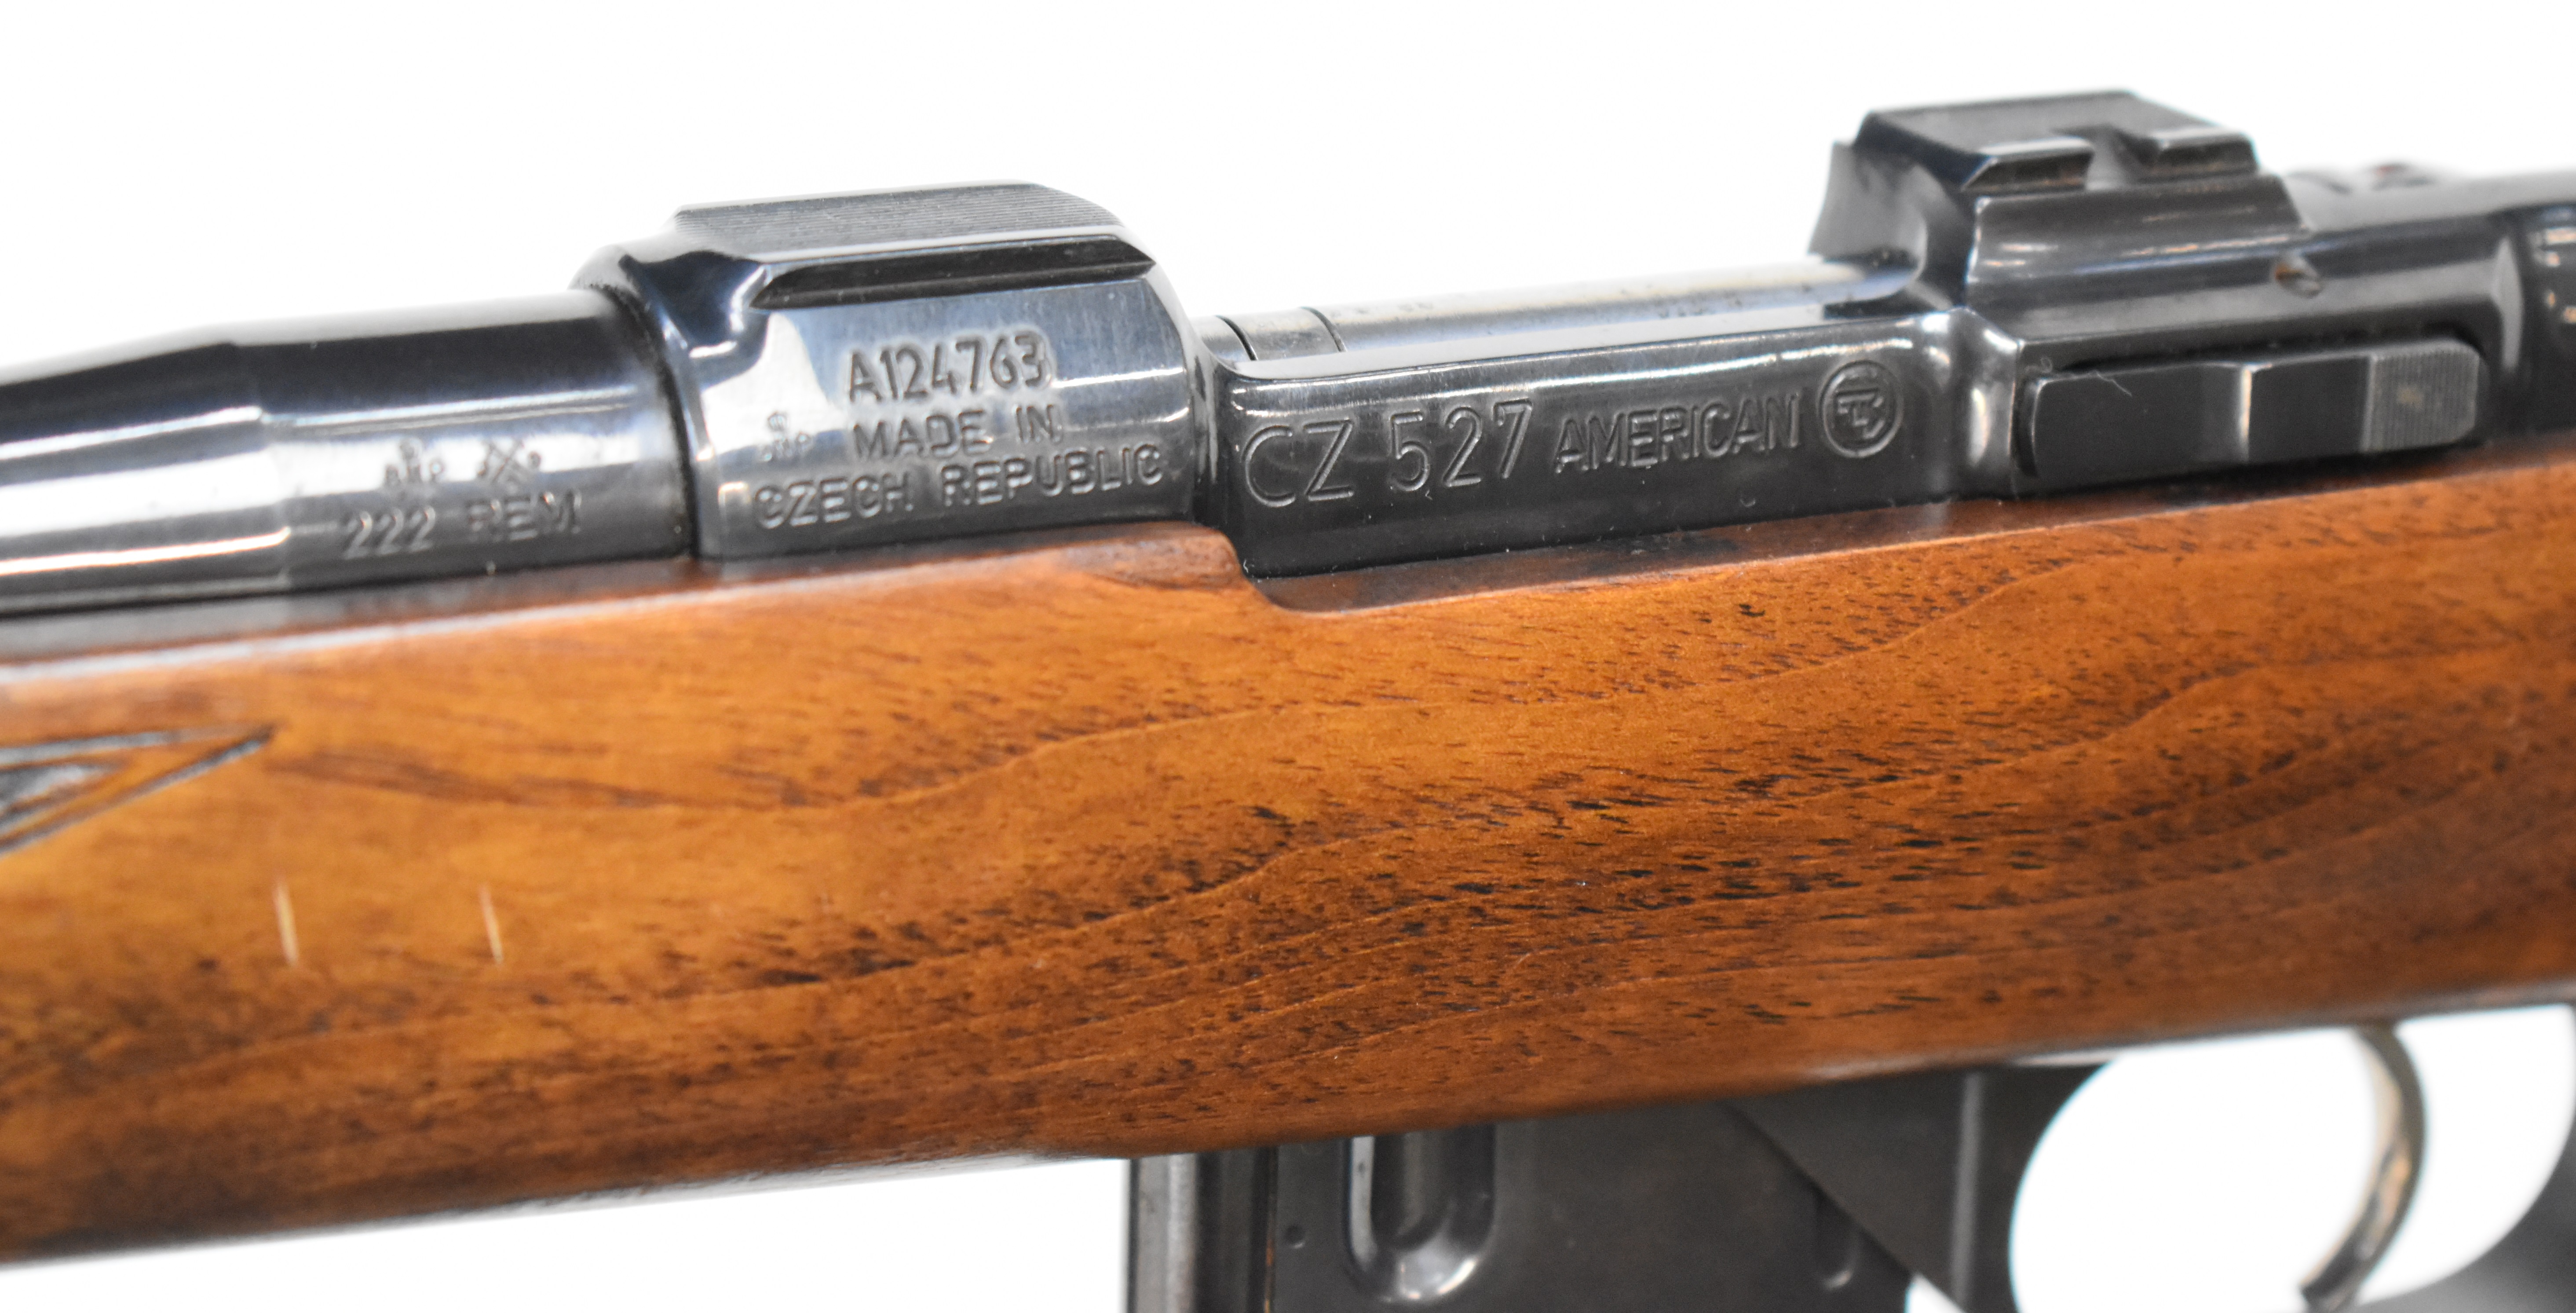 CZ 527 American .222 Remington bolt-action rifle with chequered semi-pistol grip and forend, sling - Image 10 of 10